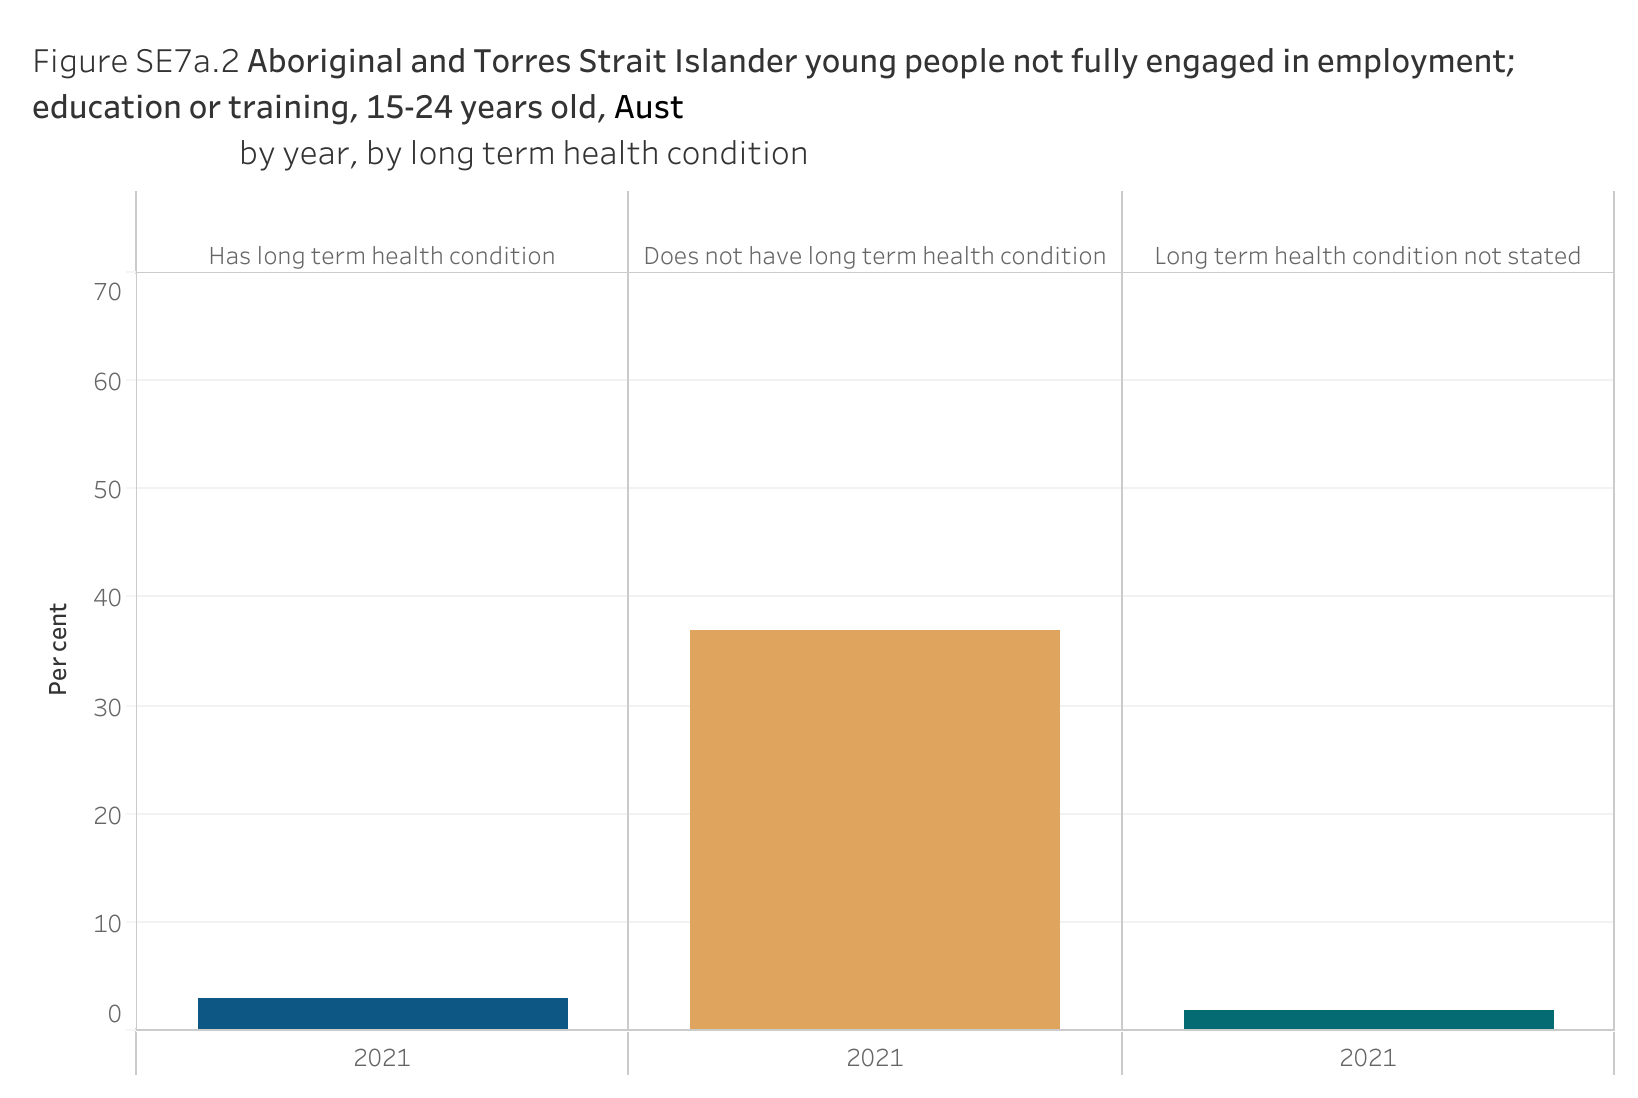 Figure SE7a.2 shows the Aboriginal and Torres Strait Islander young people not fully engaged in employment; education or training, 15-24 years old, Australia, by year, by long term health condition. More details can be found within the text near this image.